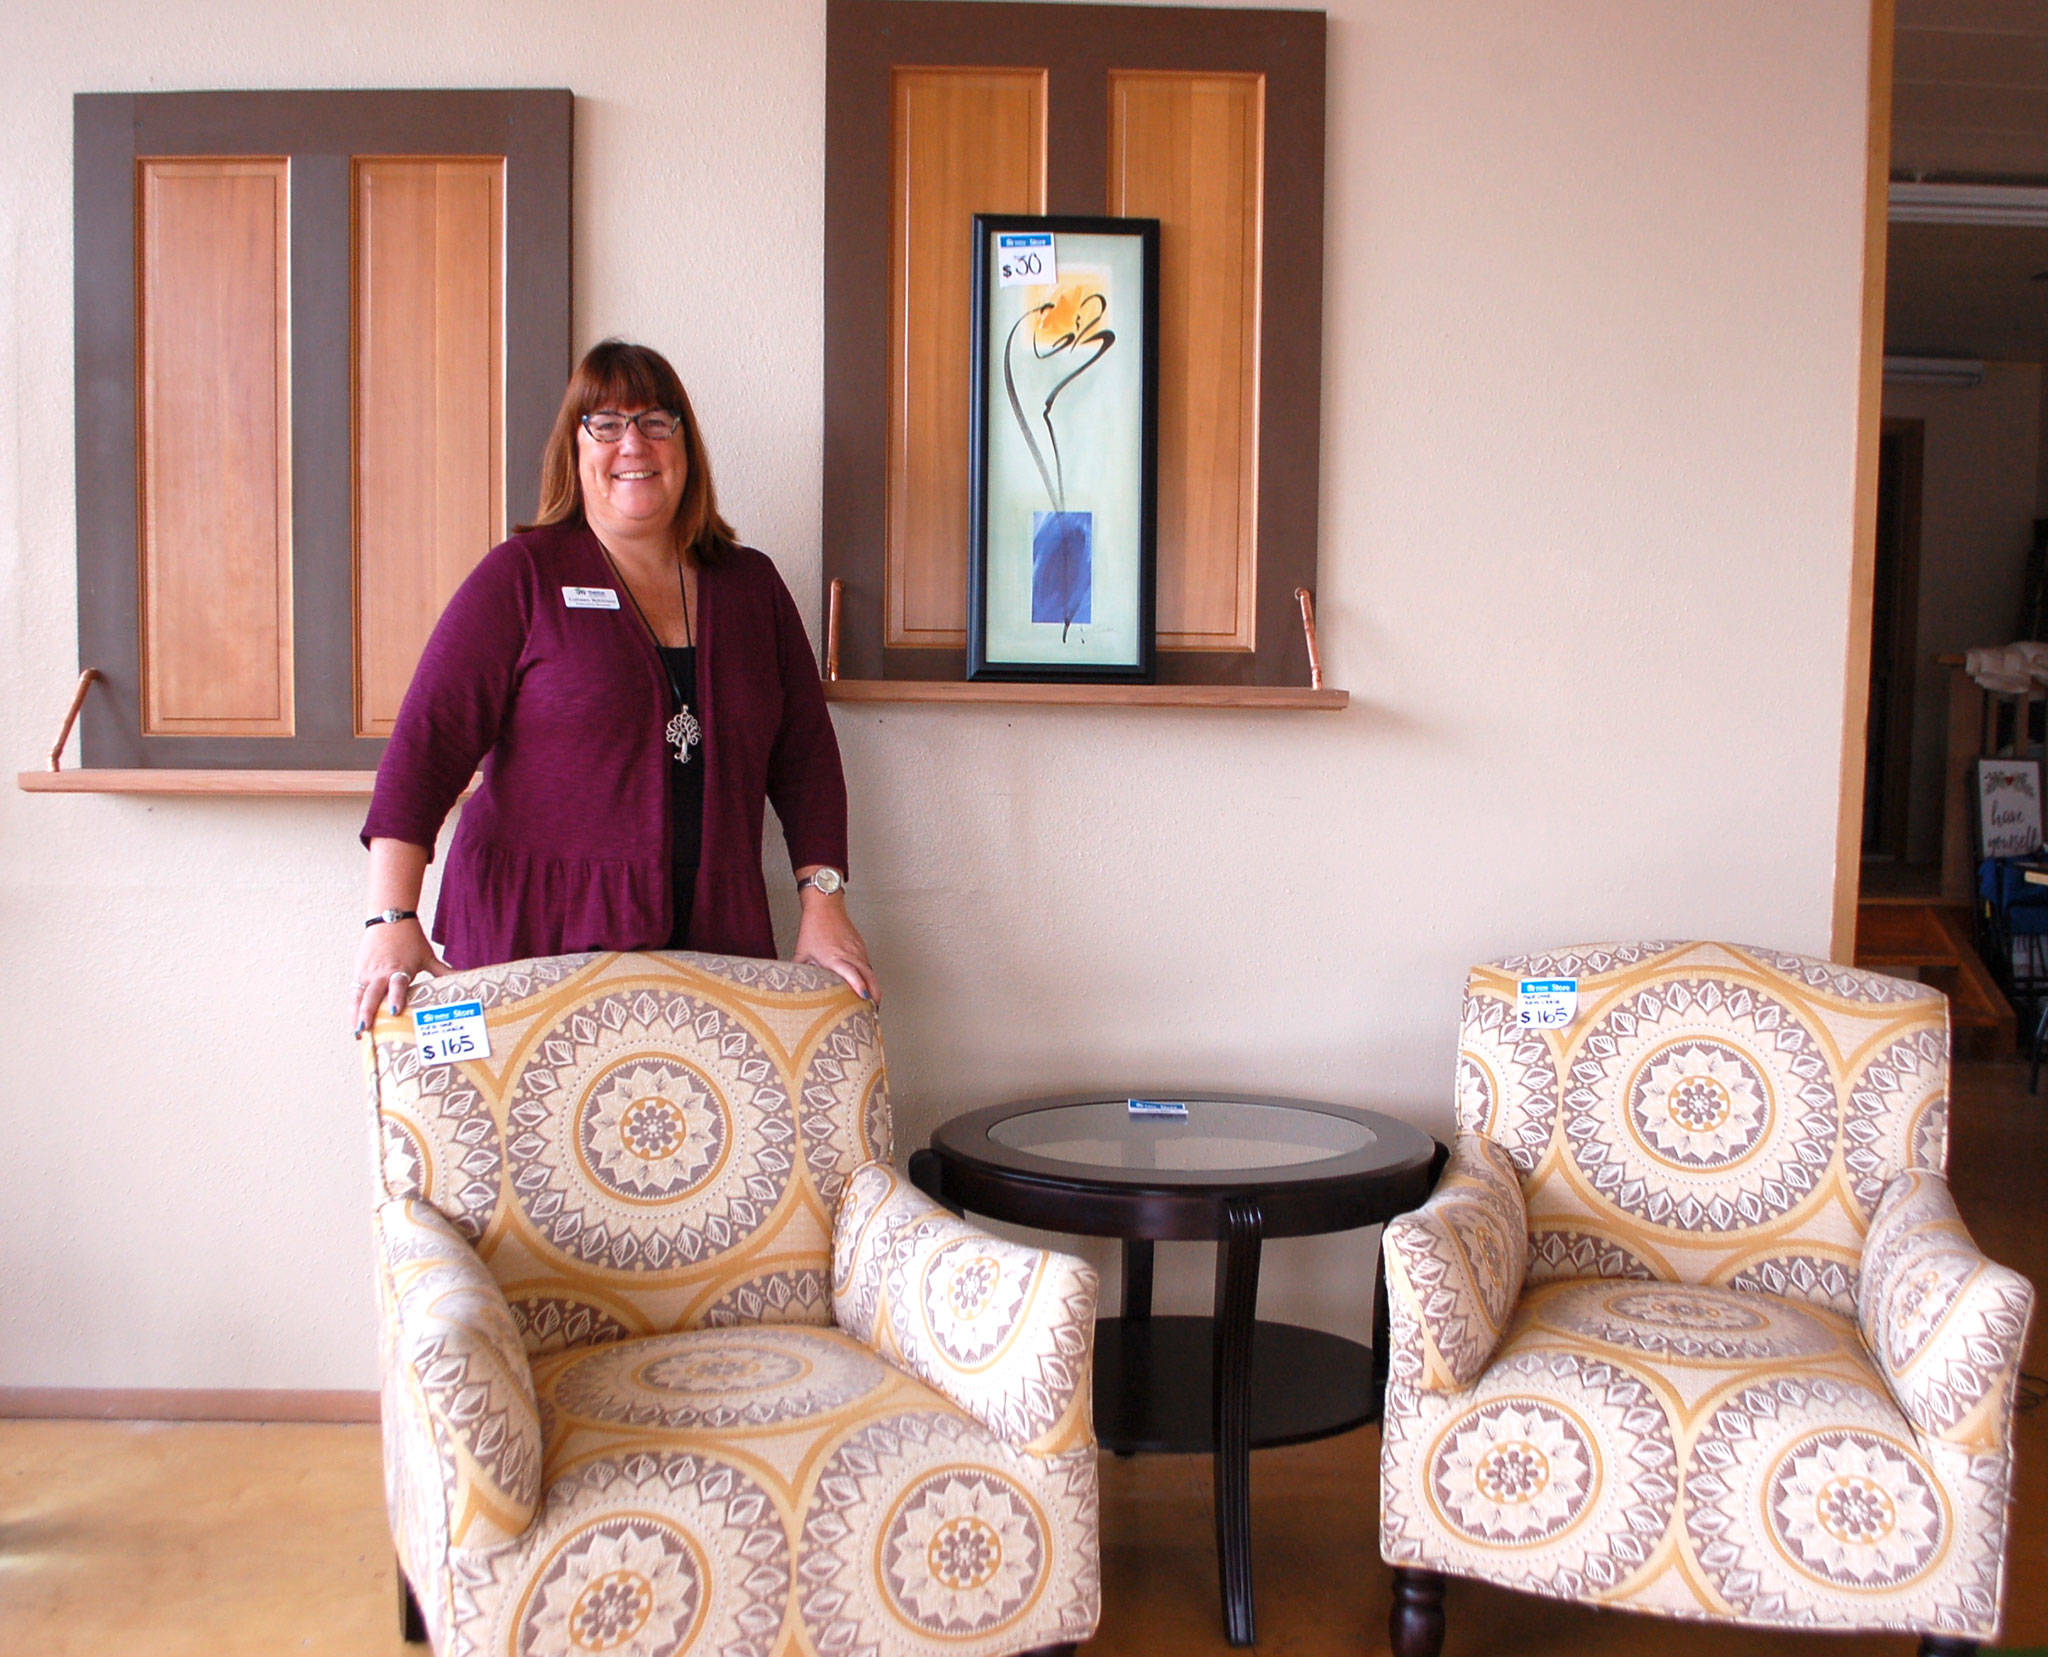 Colleen Robinson, executive director of Habitat for Humanity of Clallam County, stands in the nonprofit’s new vintage boutique in Sequim where staff also moved its main Sequim office. The new store is set to tentatively open sometime in mid-November. Sequim Gazette photo by Erin Hawkins